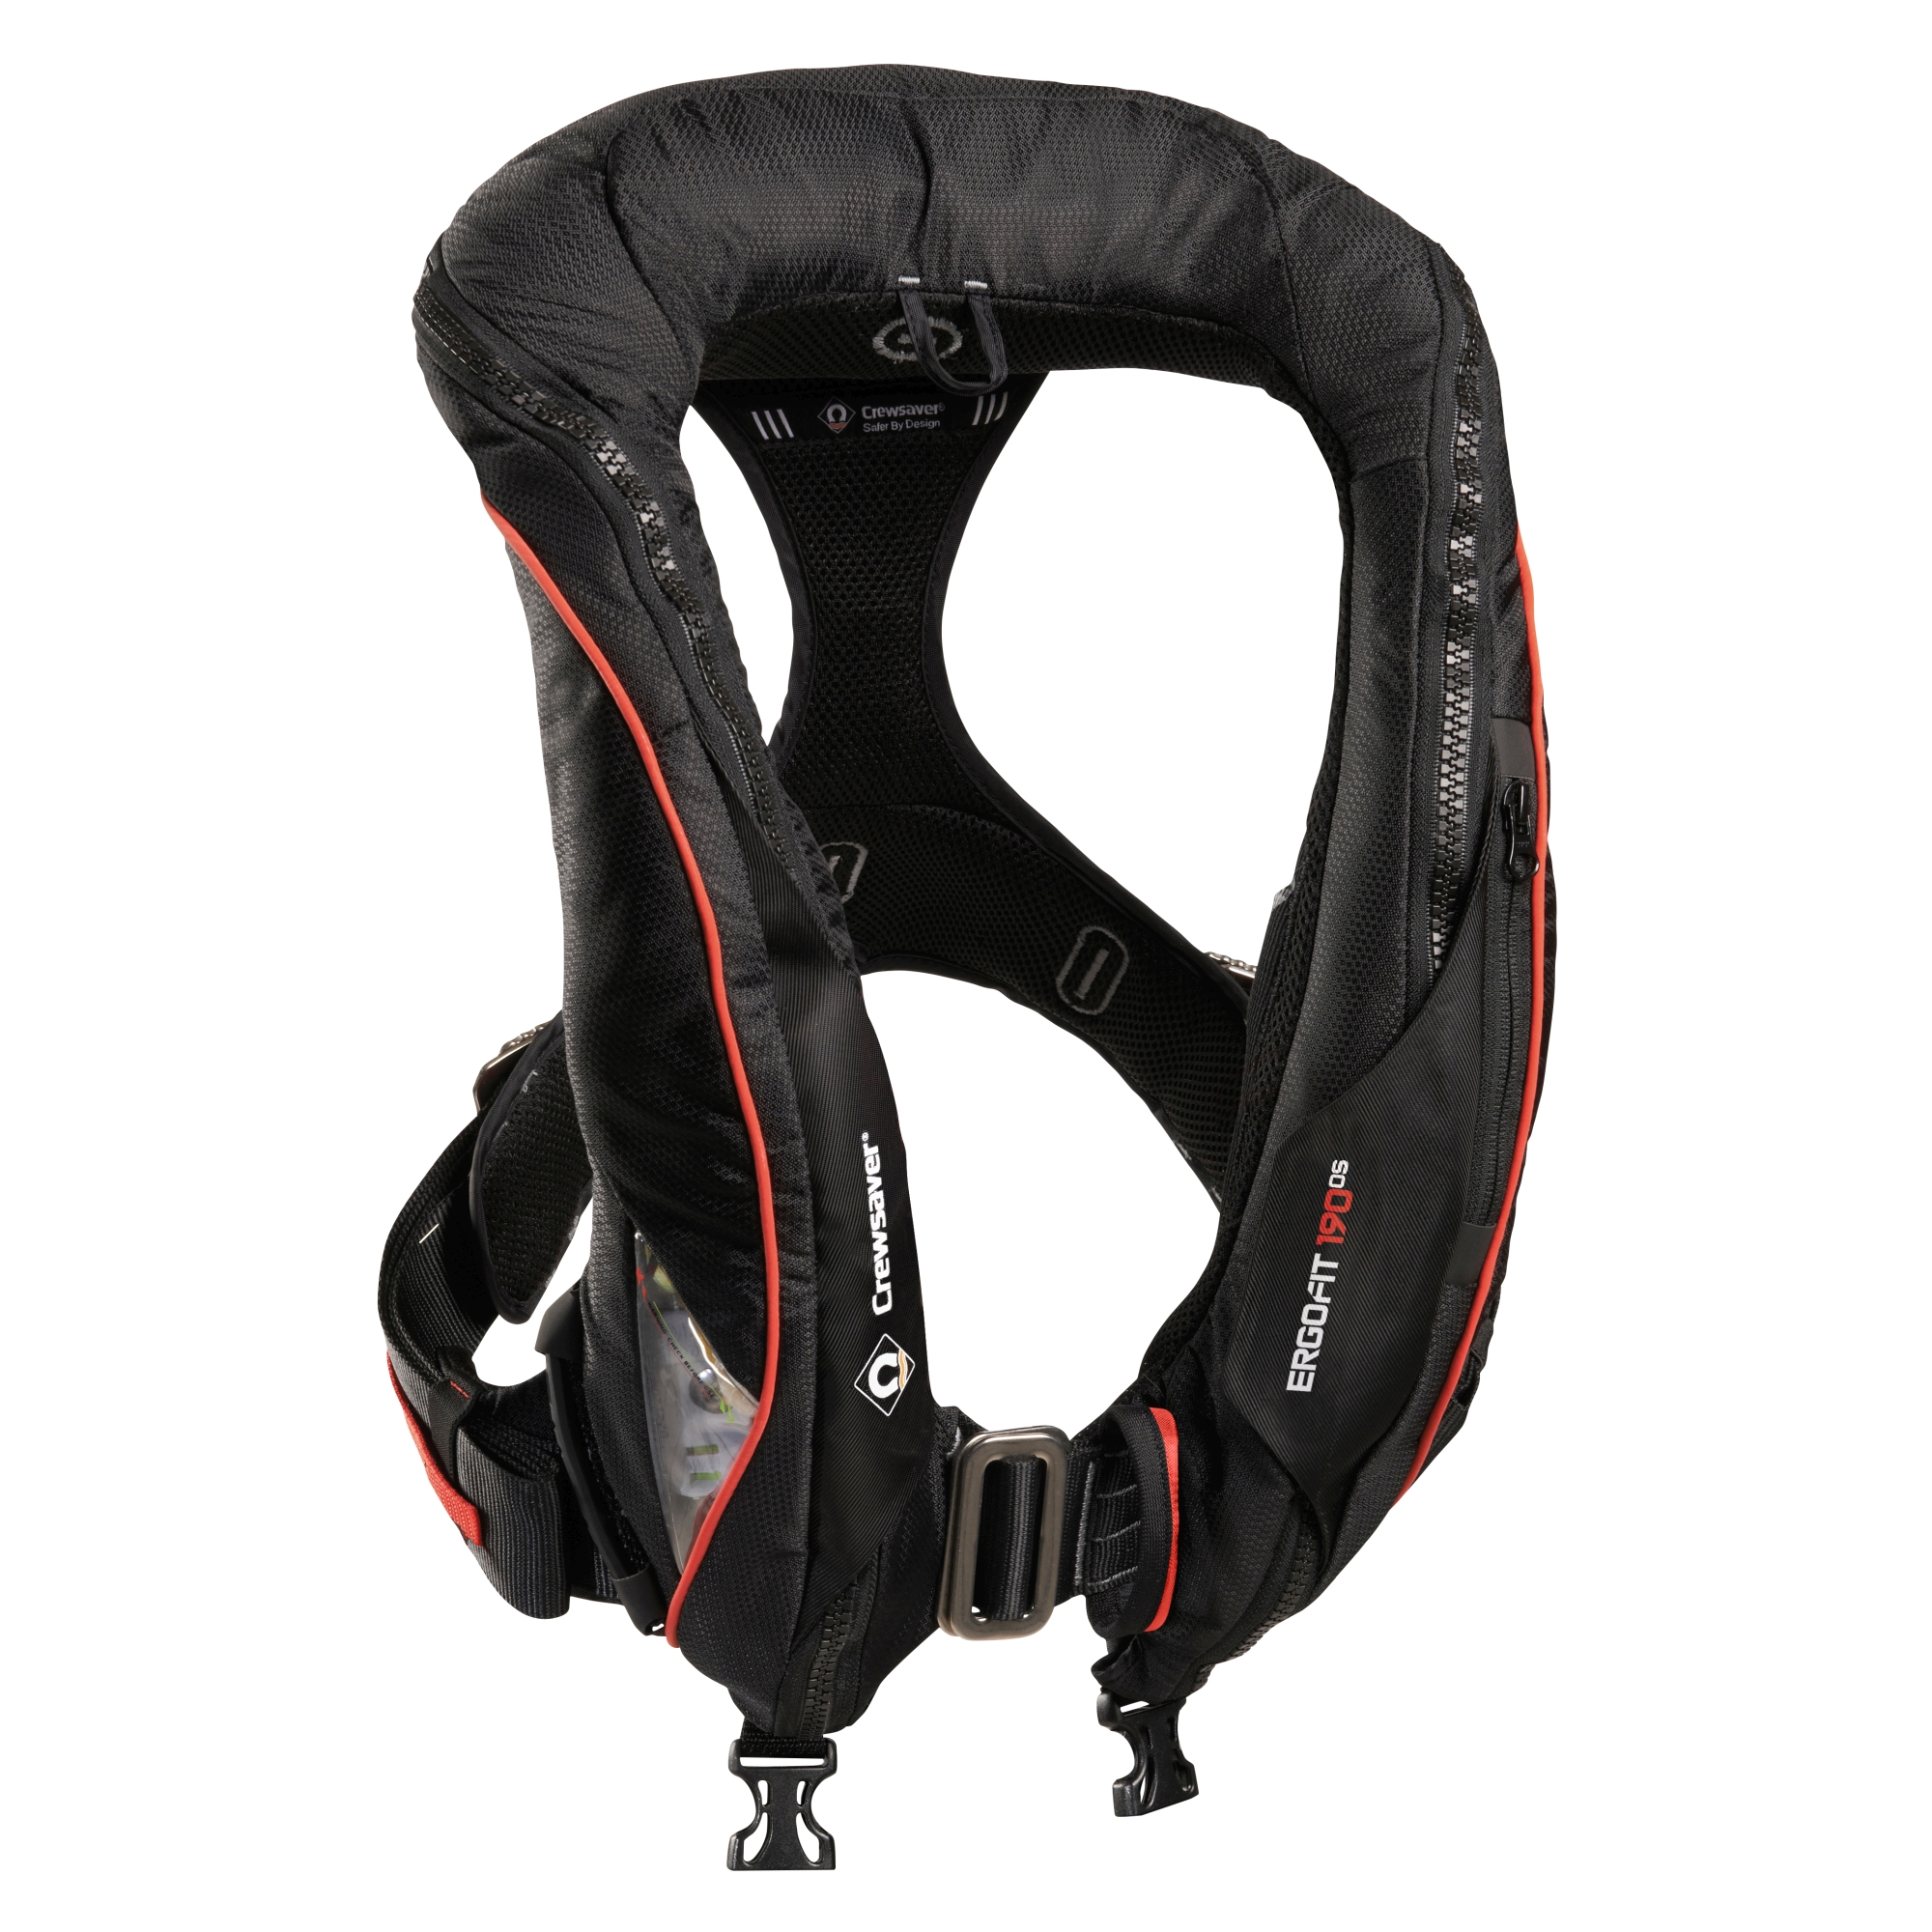 ErgoFit 190N OS Automatic with harness, light & hood